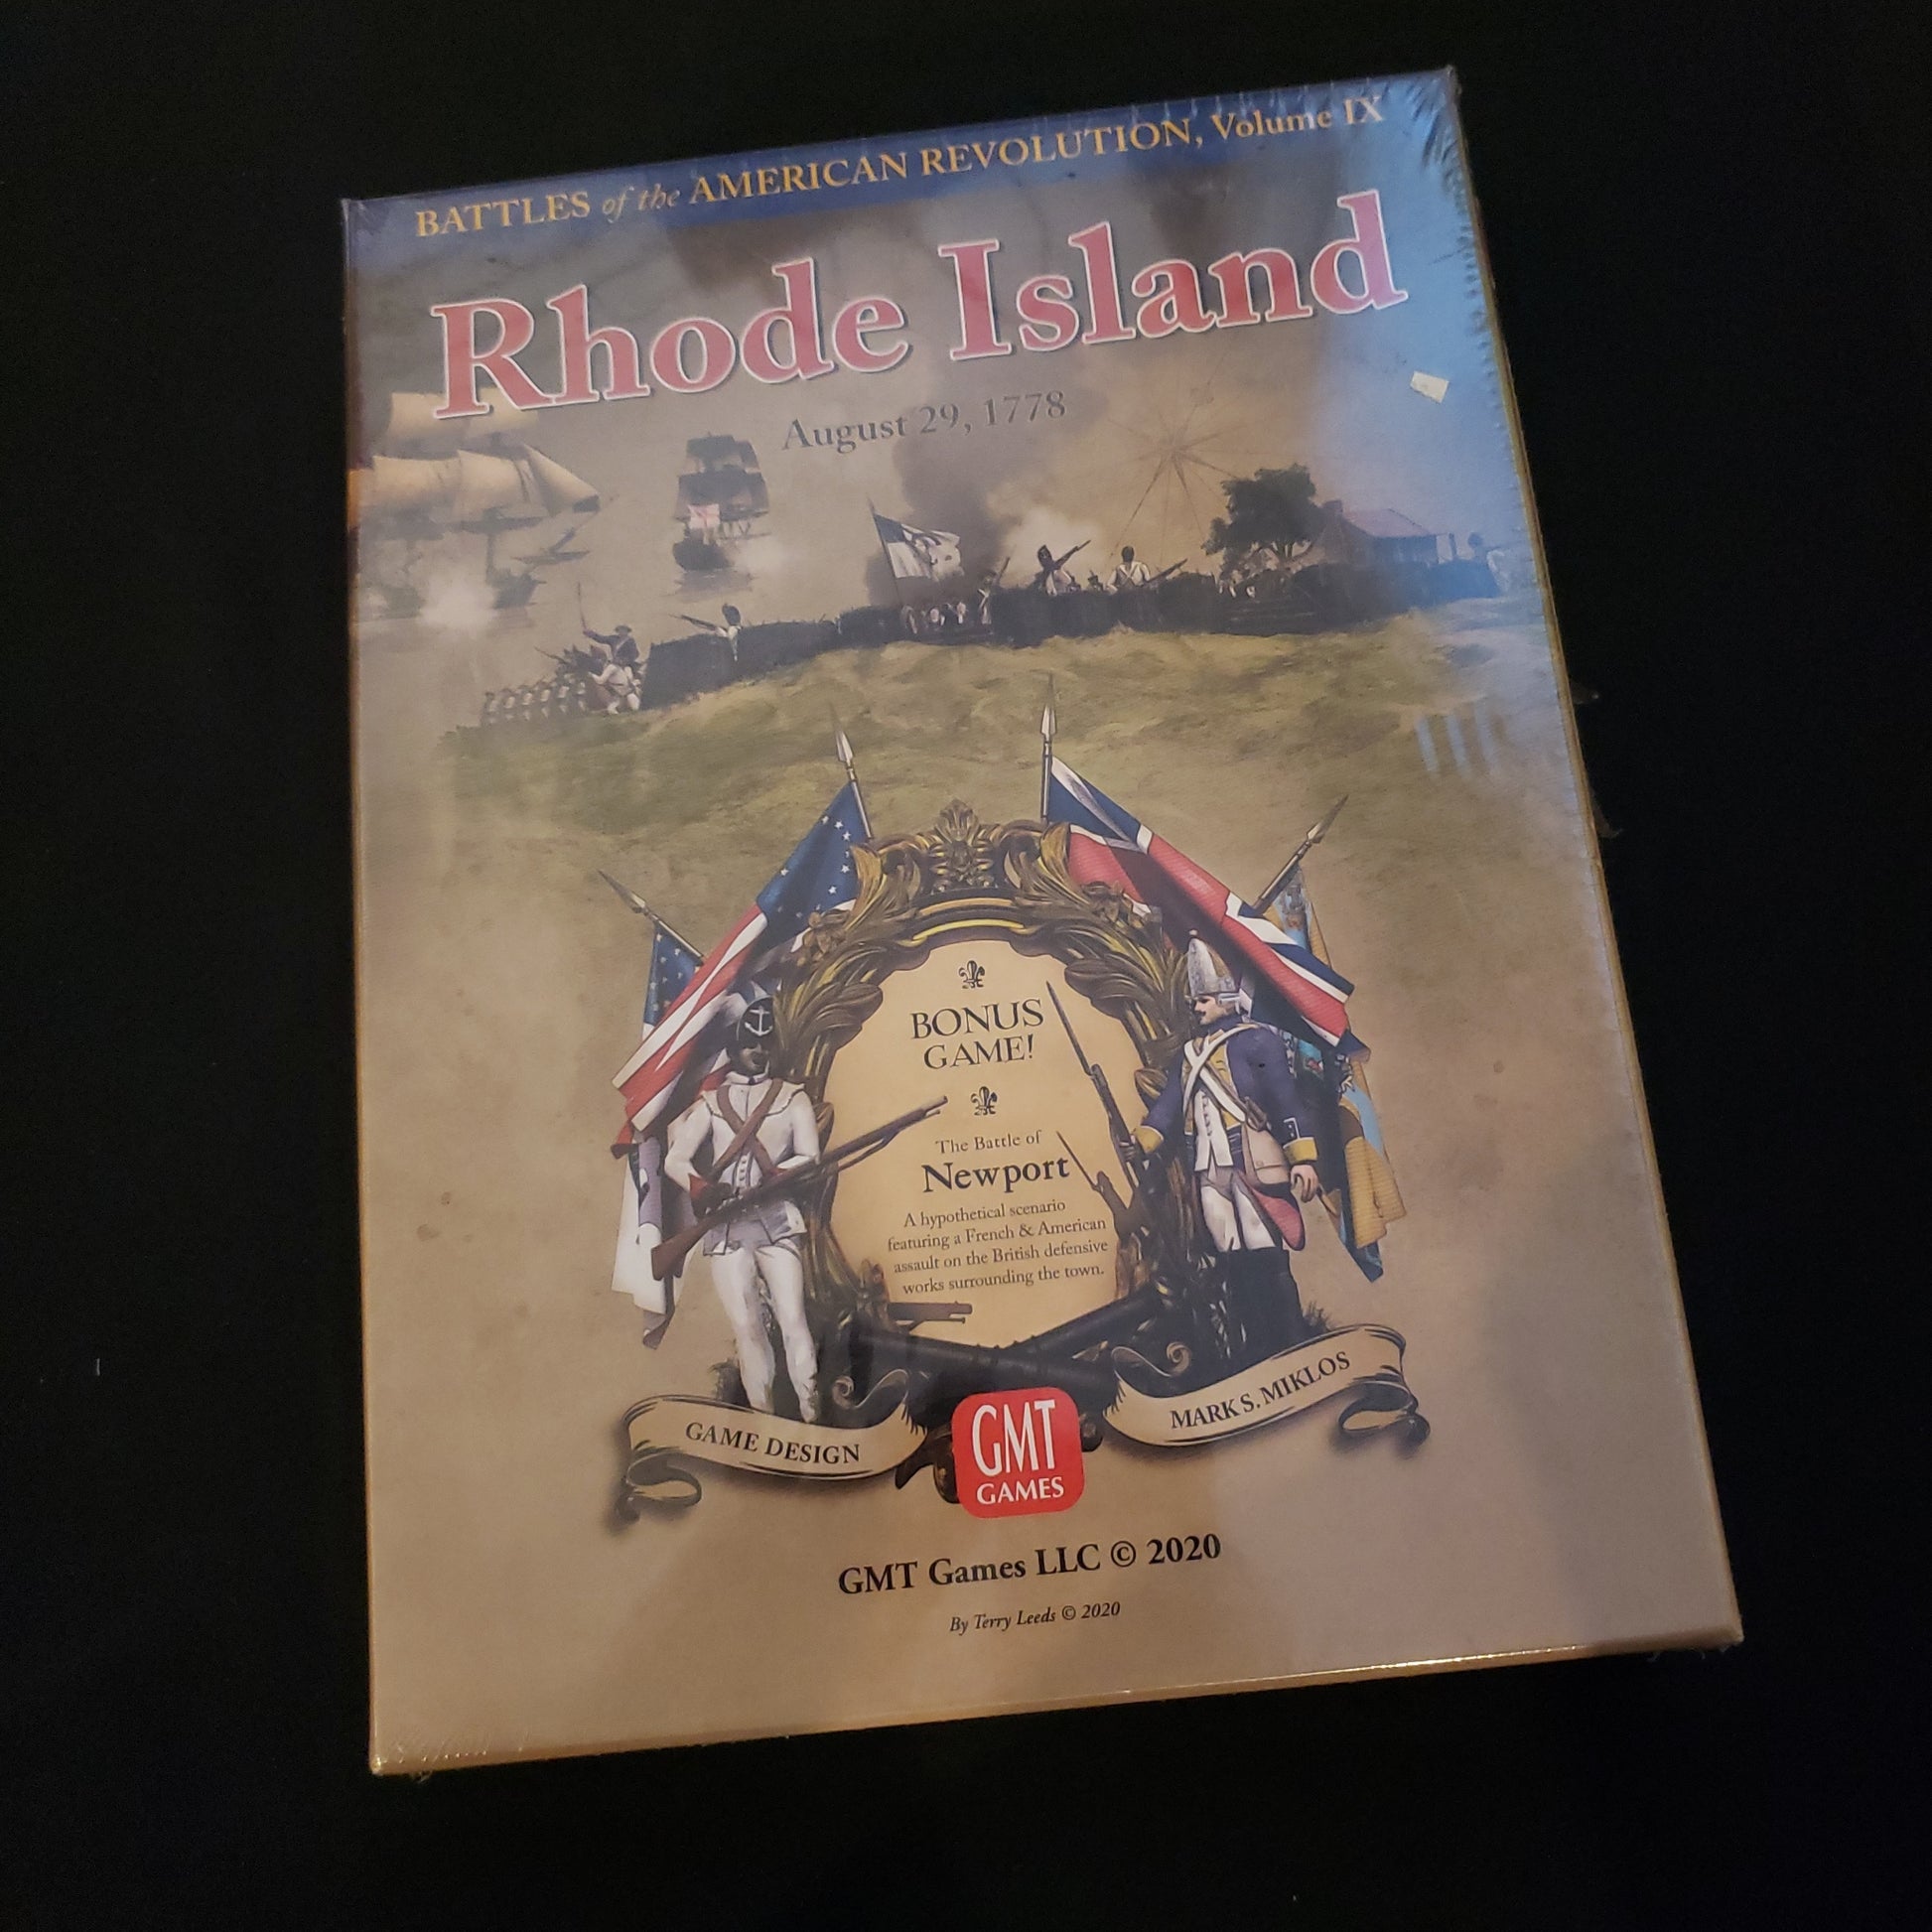 Image shows the front cover of the box of the Battles of Rhode Island & Newport board game